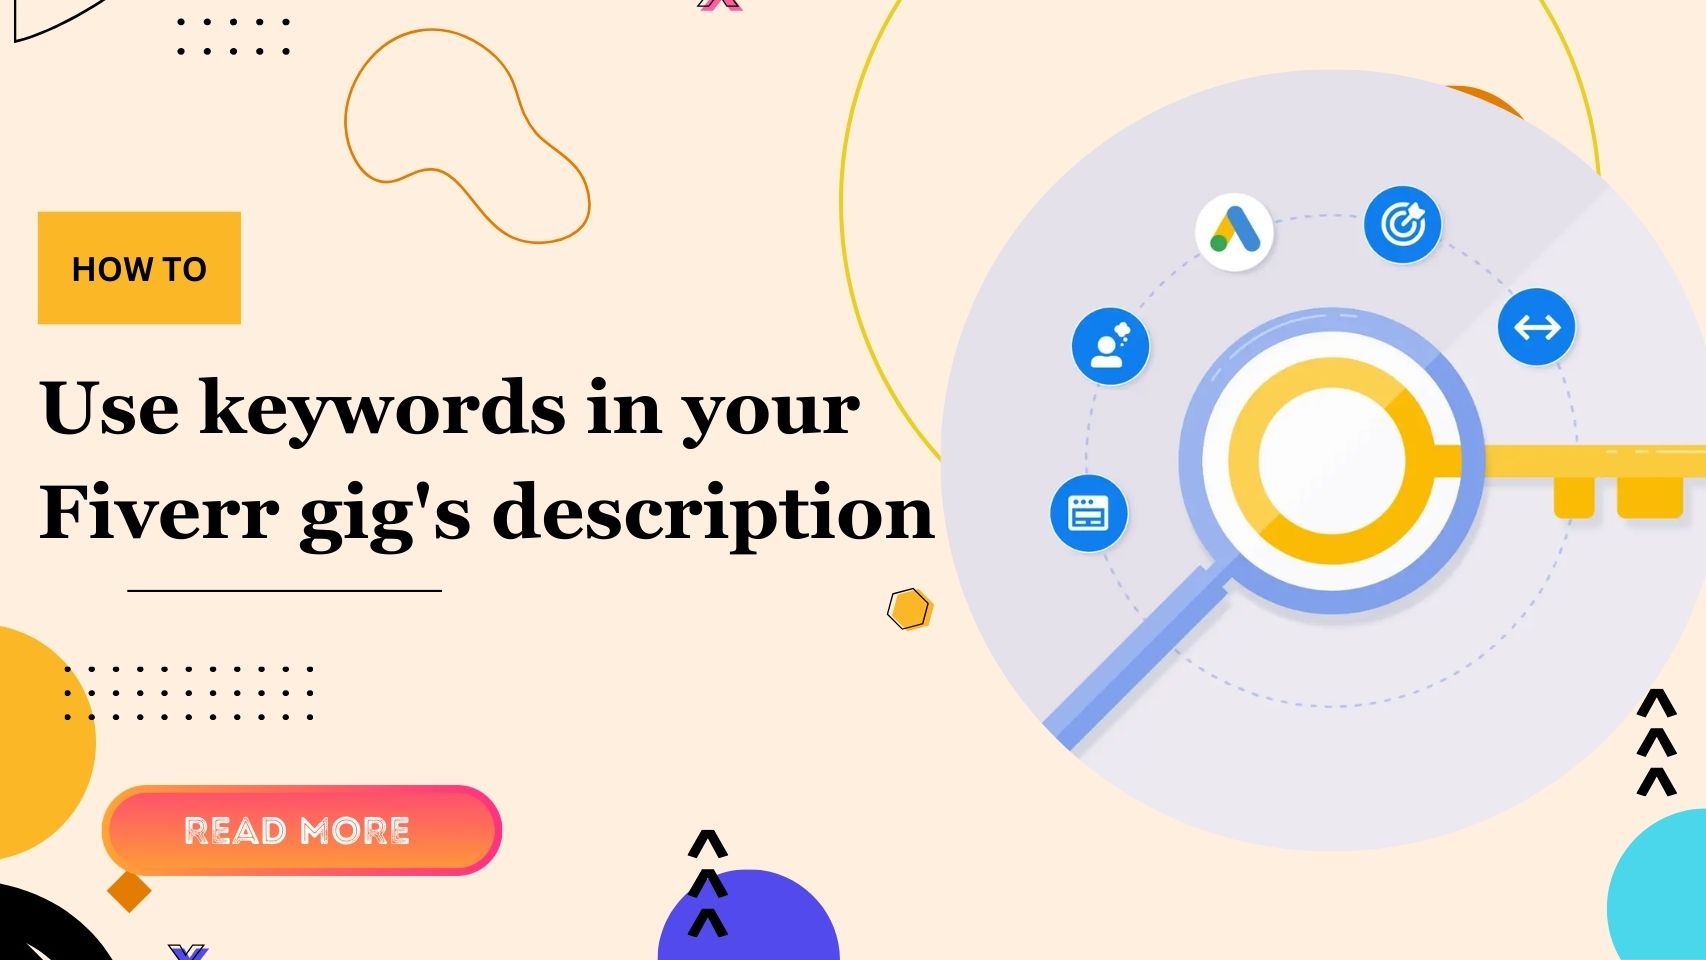 How to use keywords in your Fiverr gig’s description